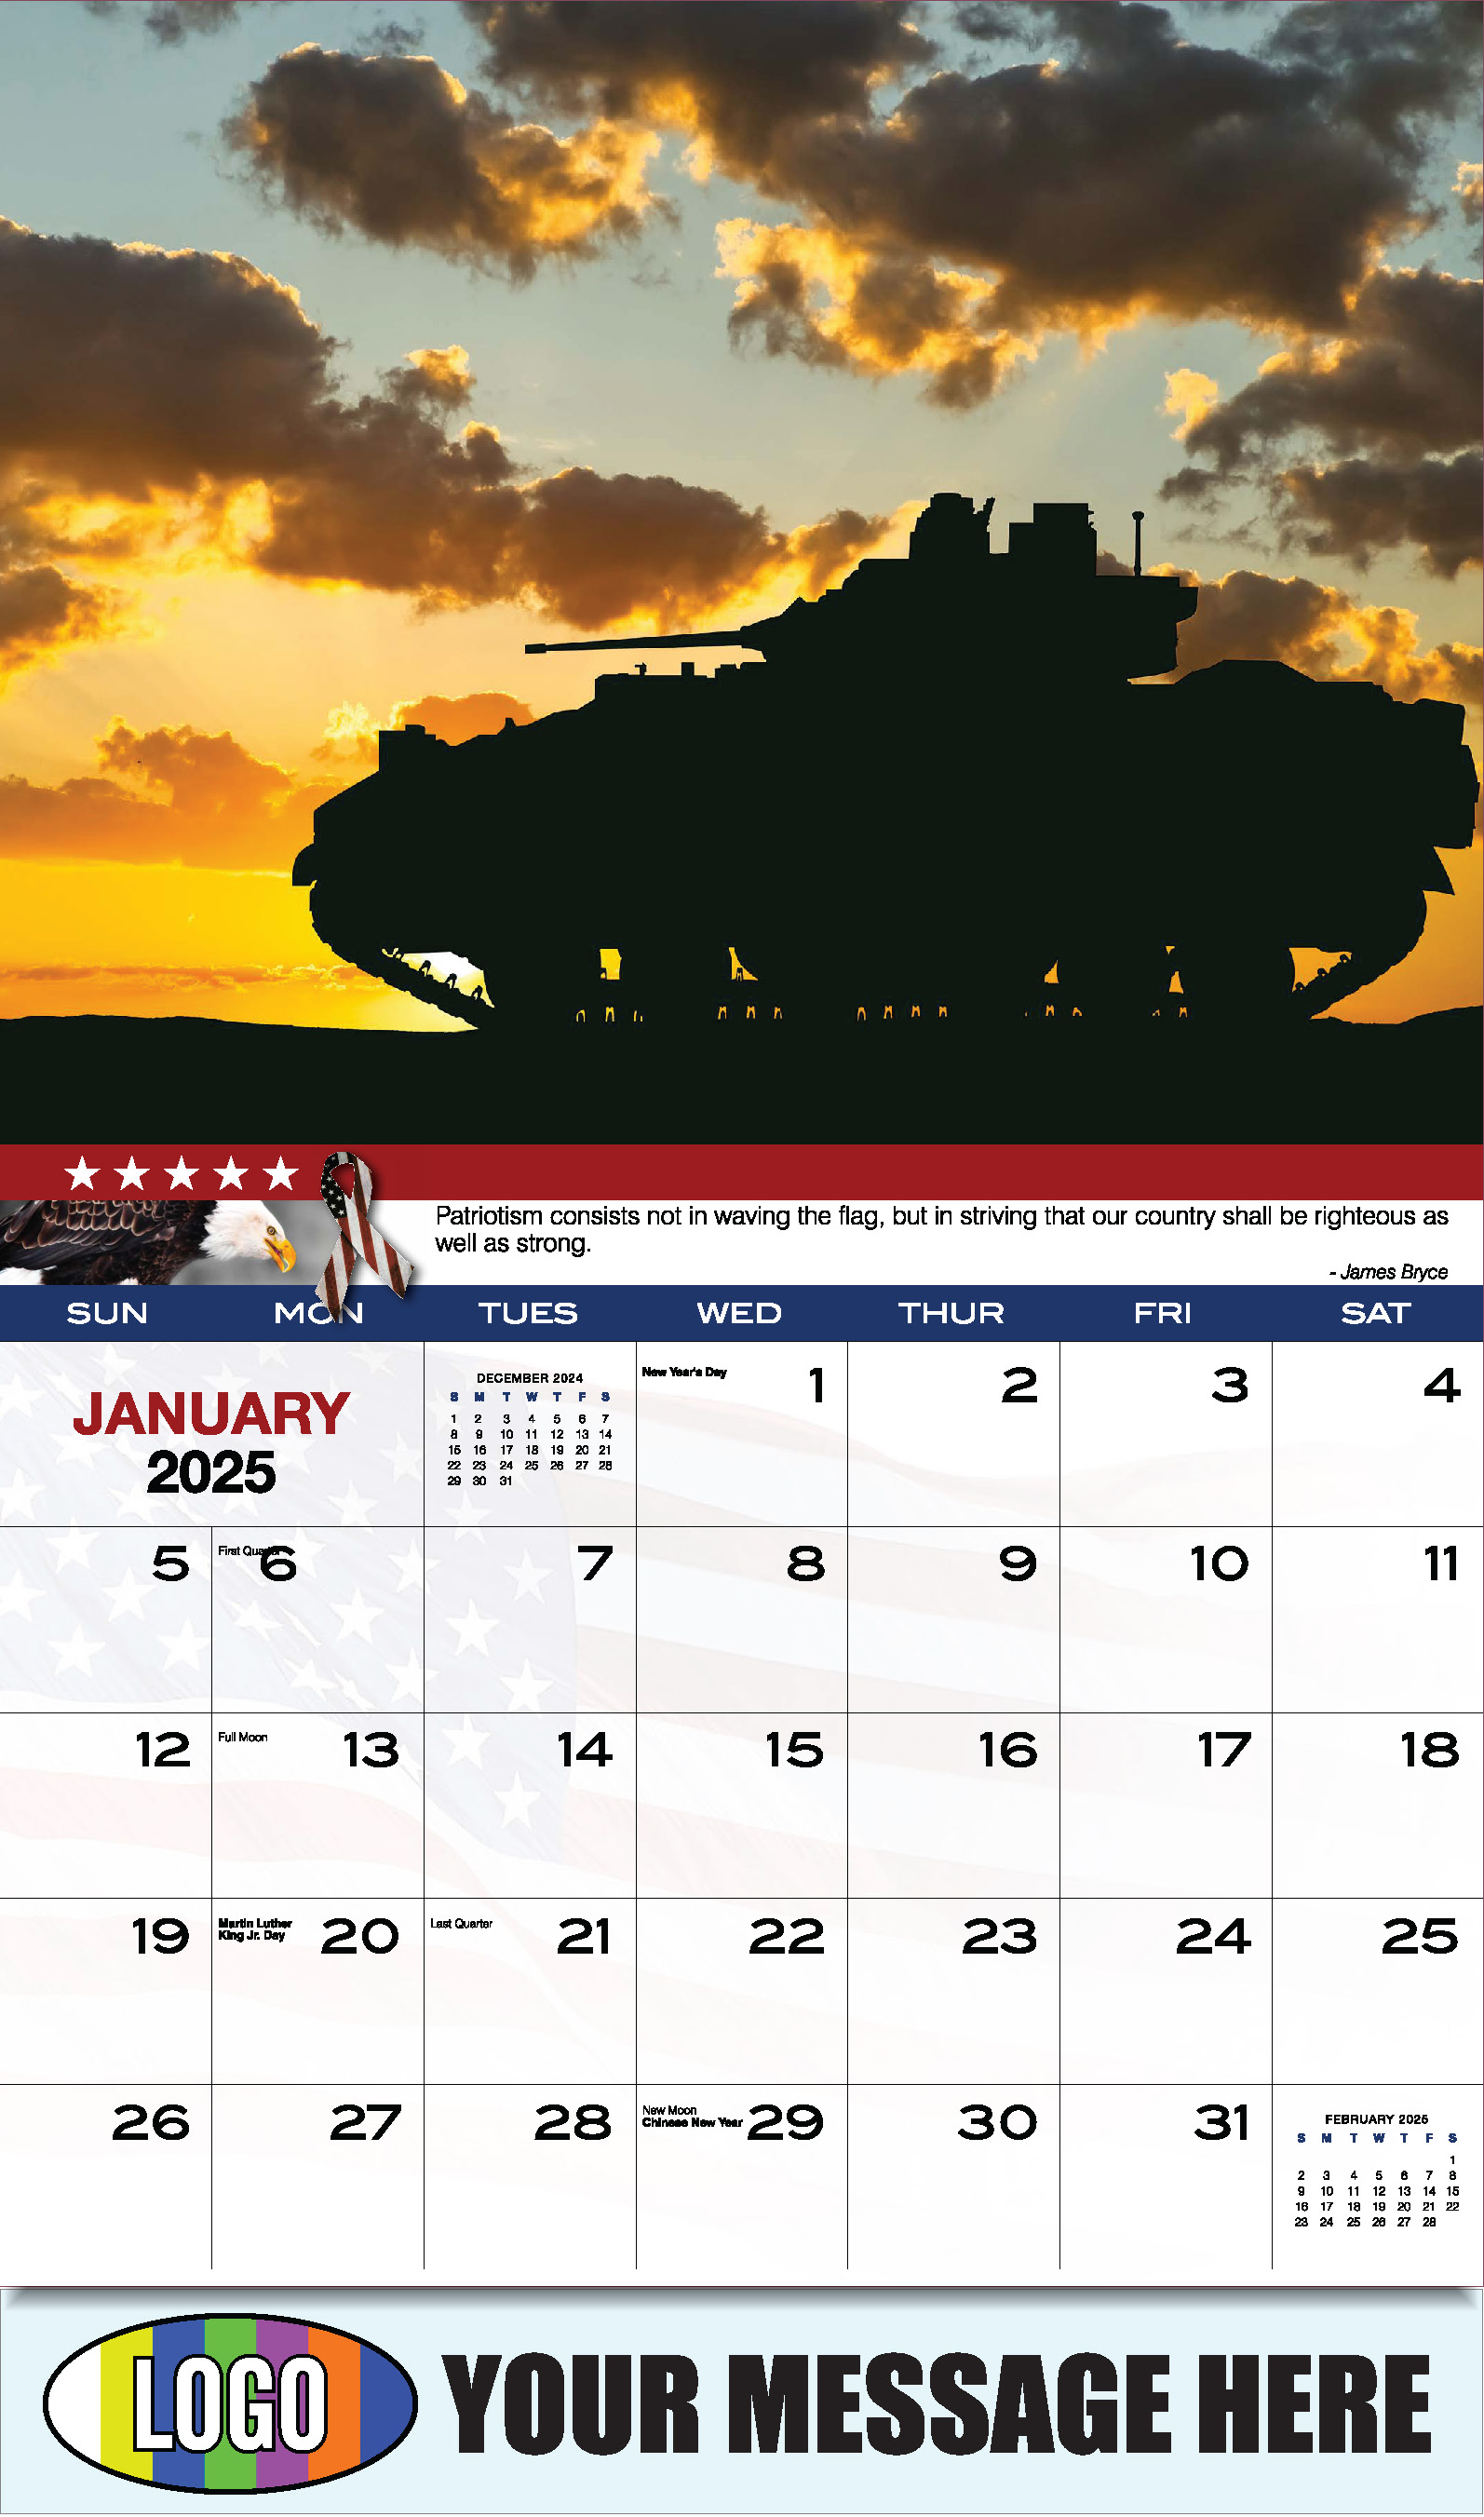 Home of the Brave 2025 USA Armed Forces Business Promo Calendar - January